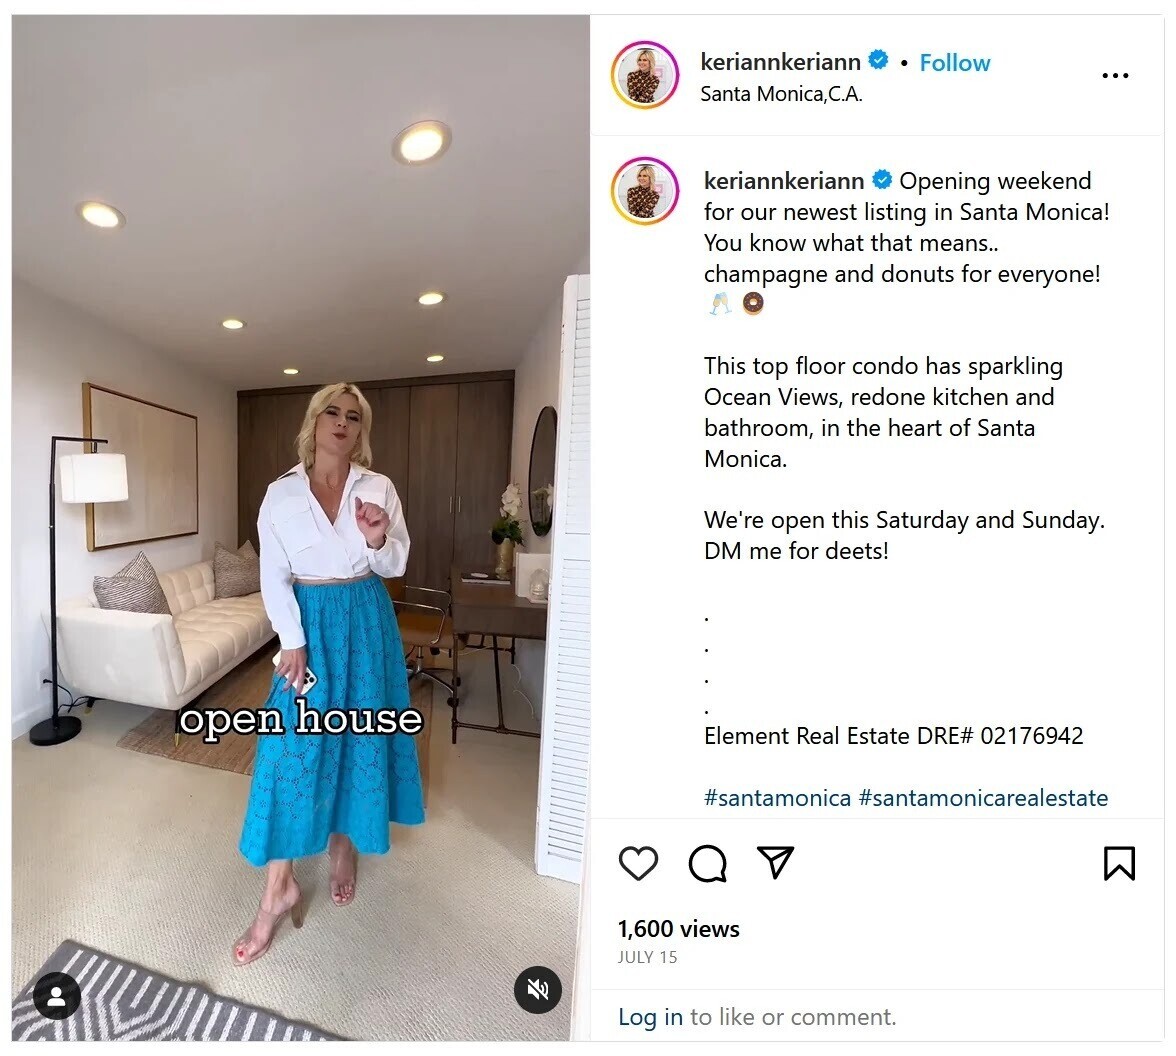 A video open house announcement on Instagram